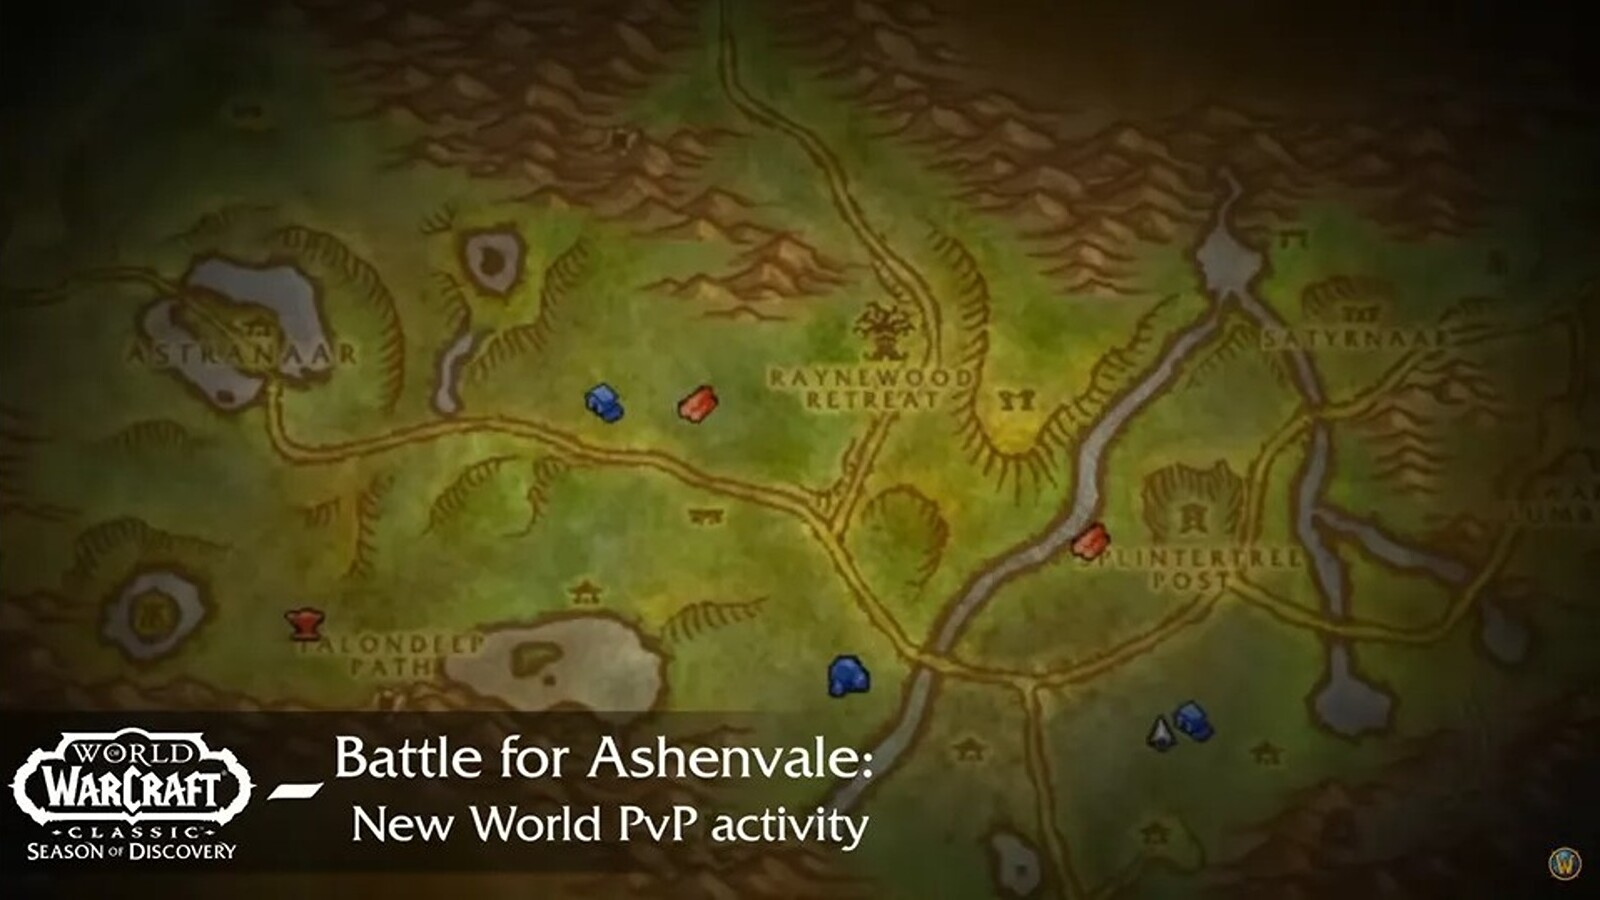 WoW Season of Discovery’s Ashenvale event is seeing major reputation changes